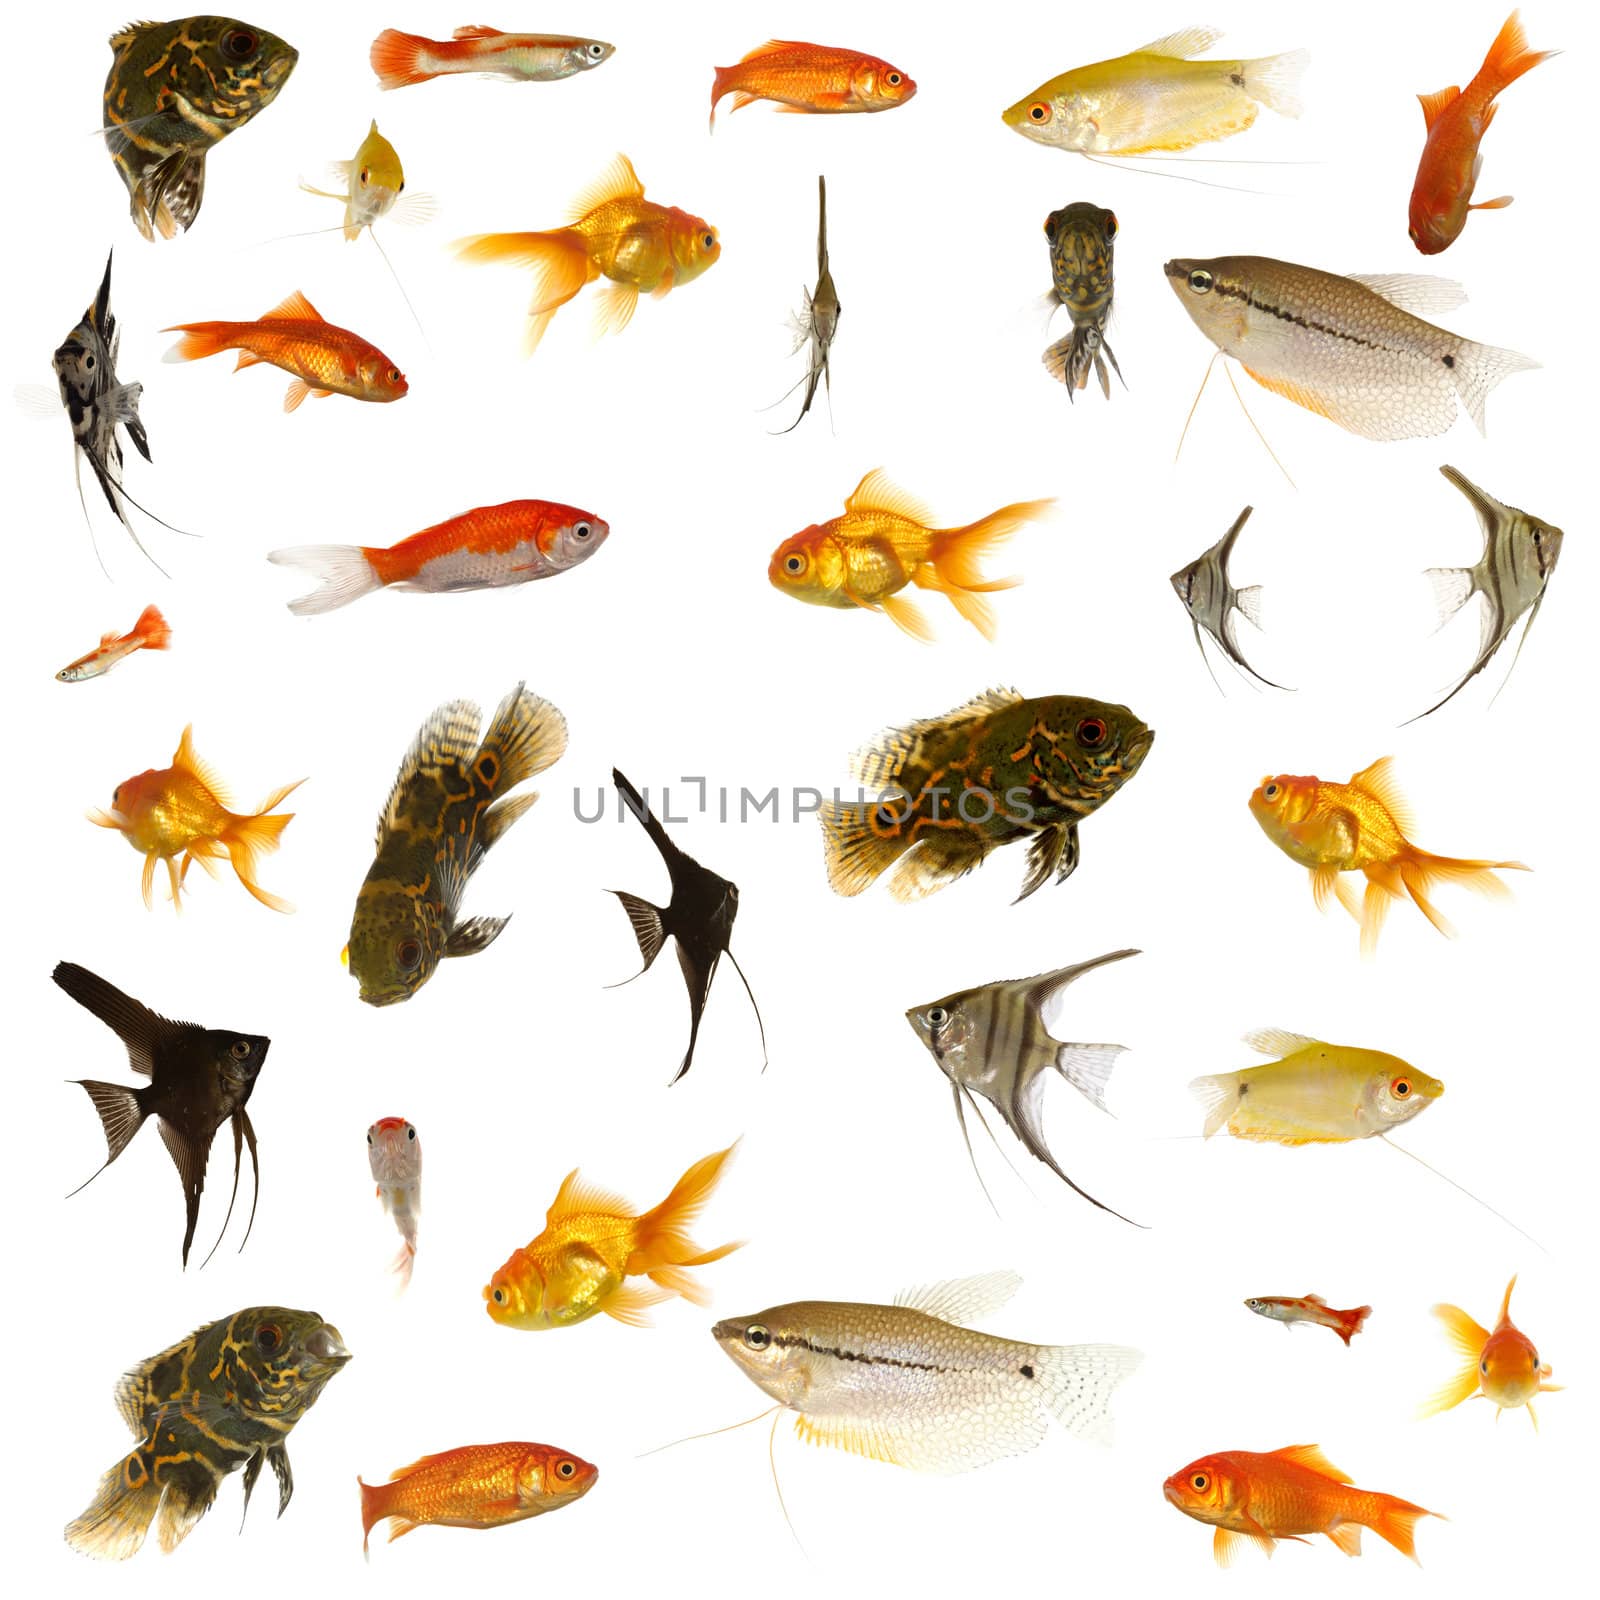 Fish collection with many different tropical fish.